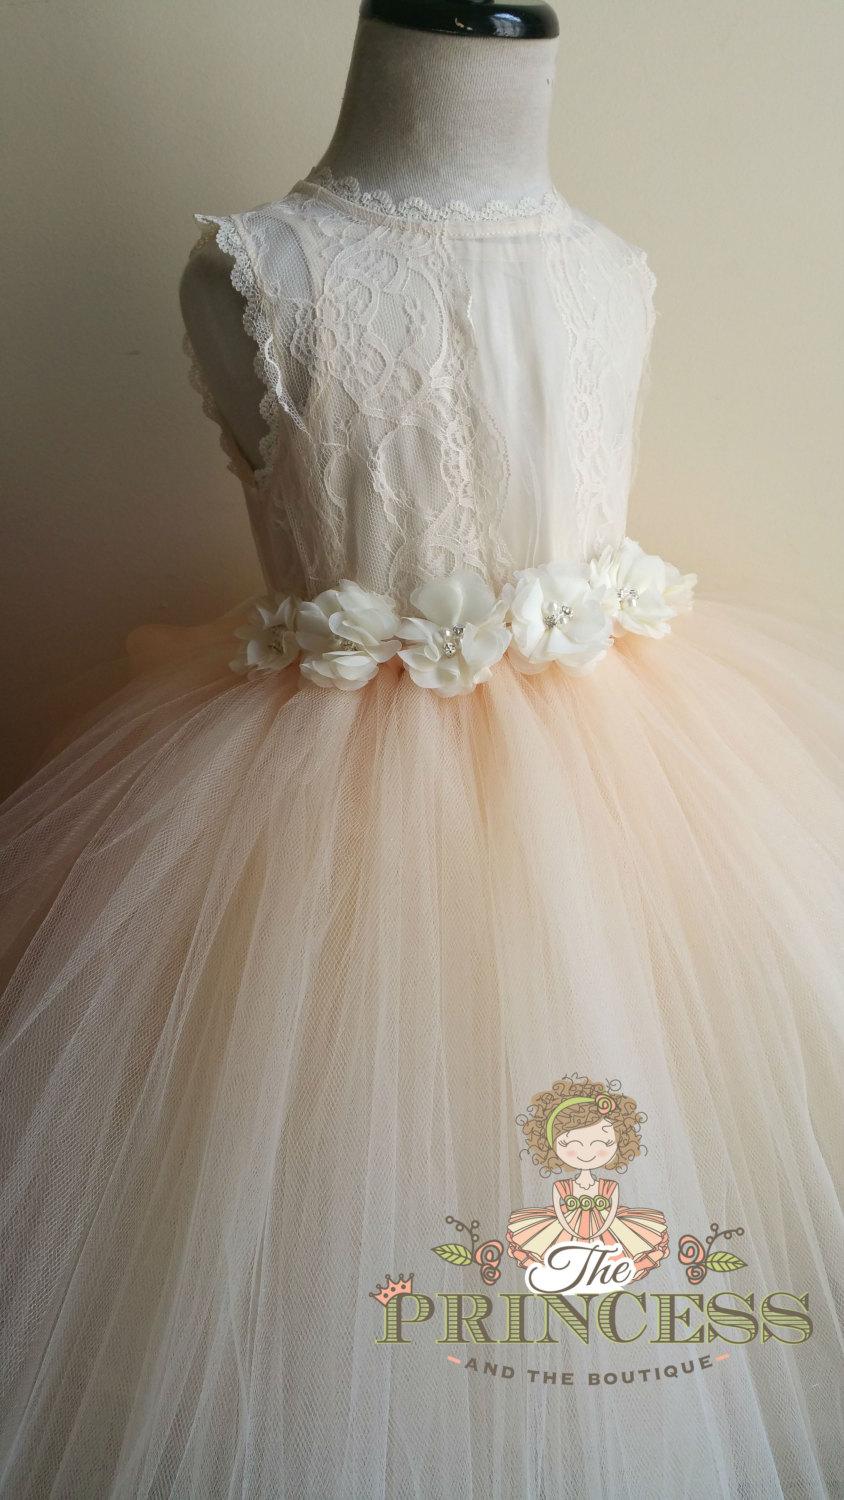 Mariage - champagne flower girl dress, champagne tutu dress, champagne dress, champagne child dress, flower girl dress tulle, baby dress, vintage